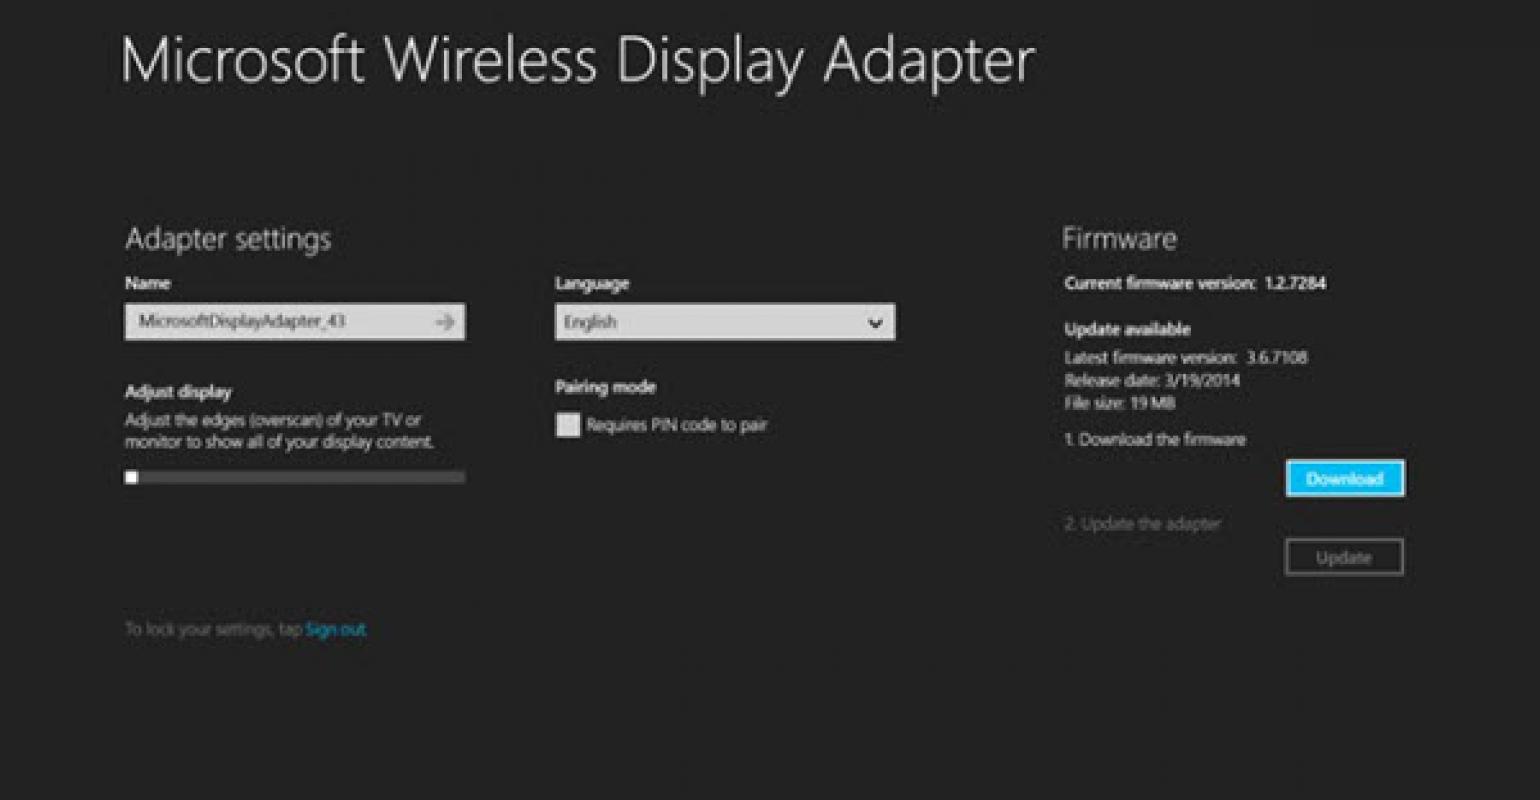 Microsoft Wireless Display Adapter app: All you Need to Know